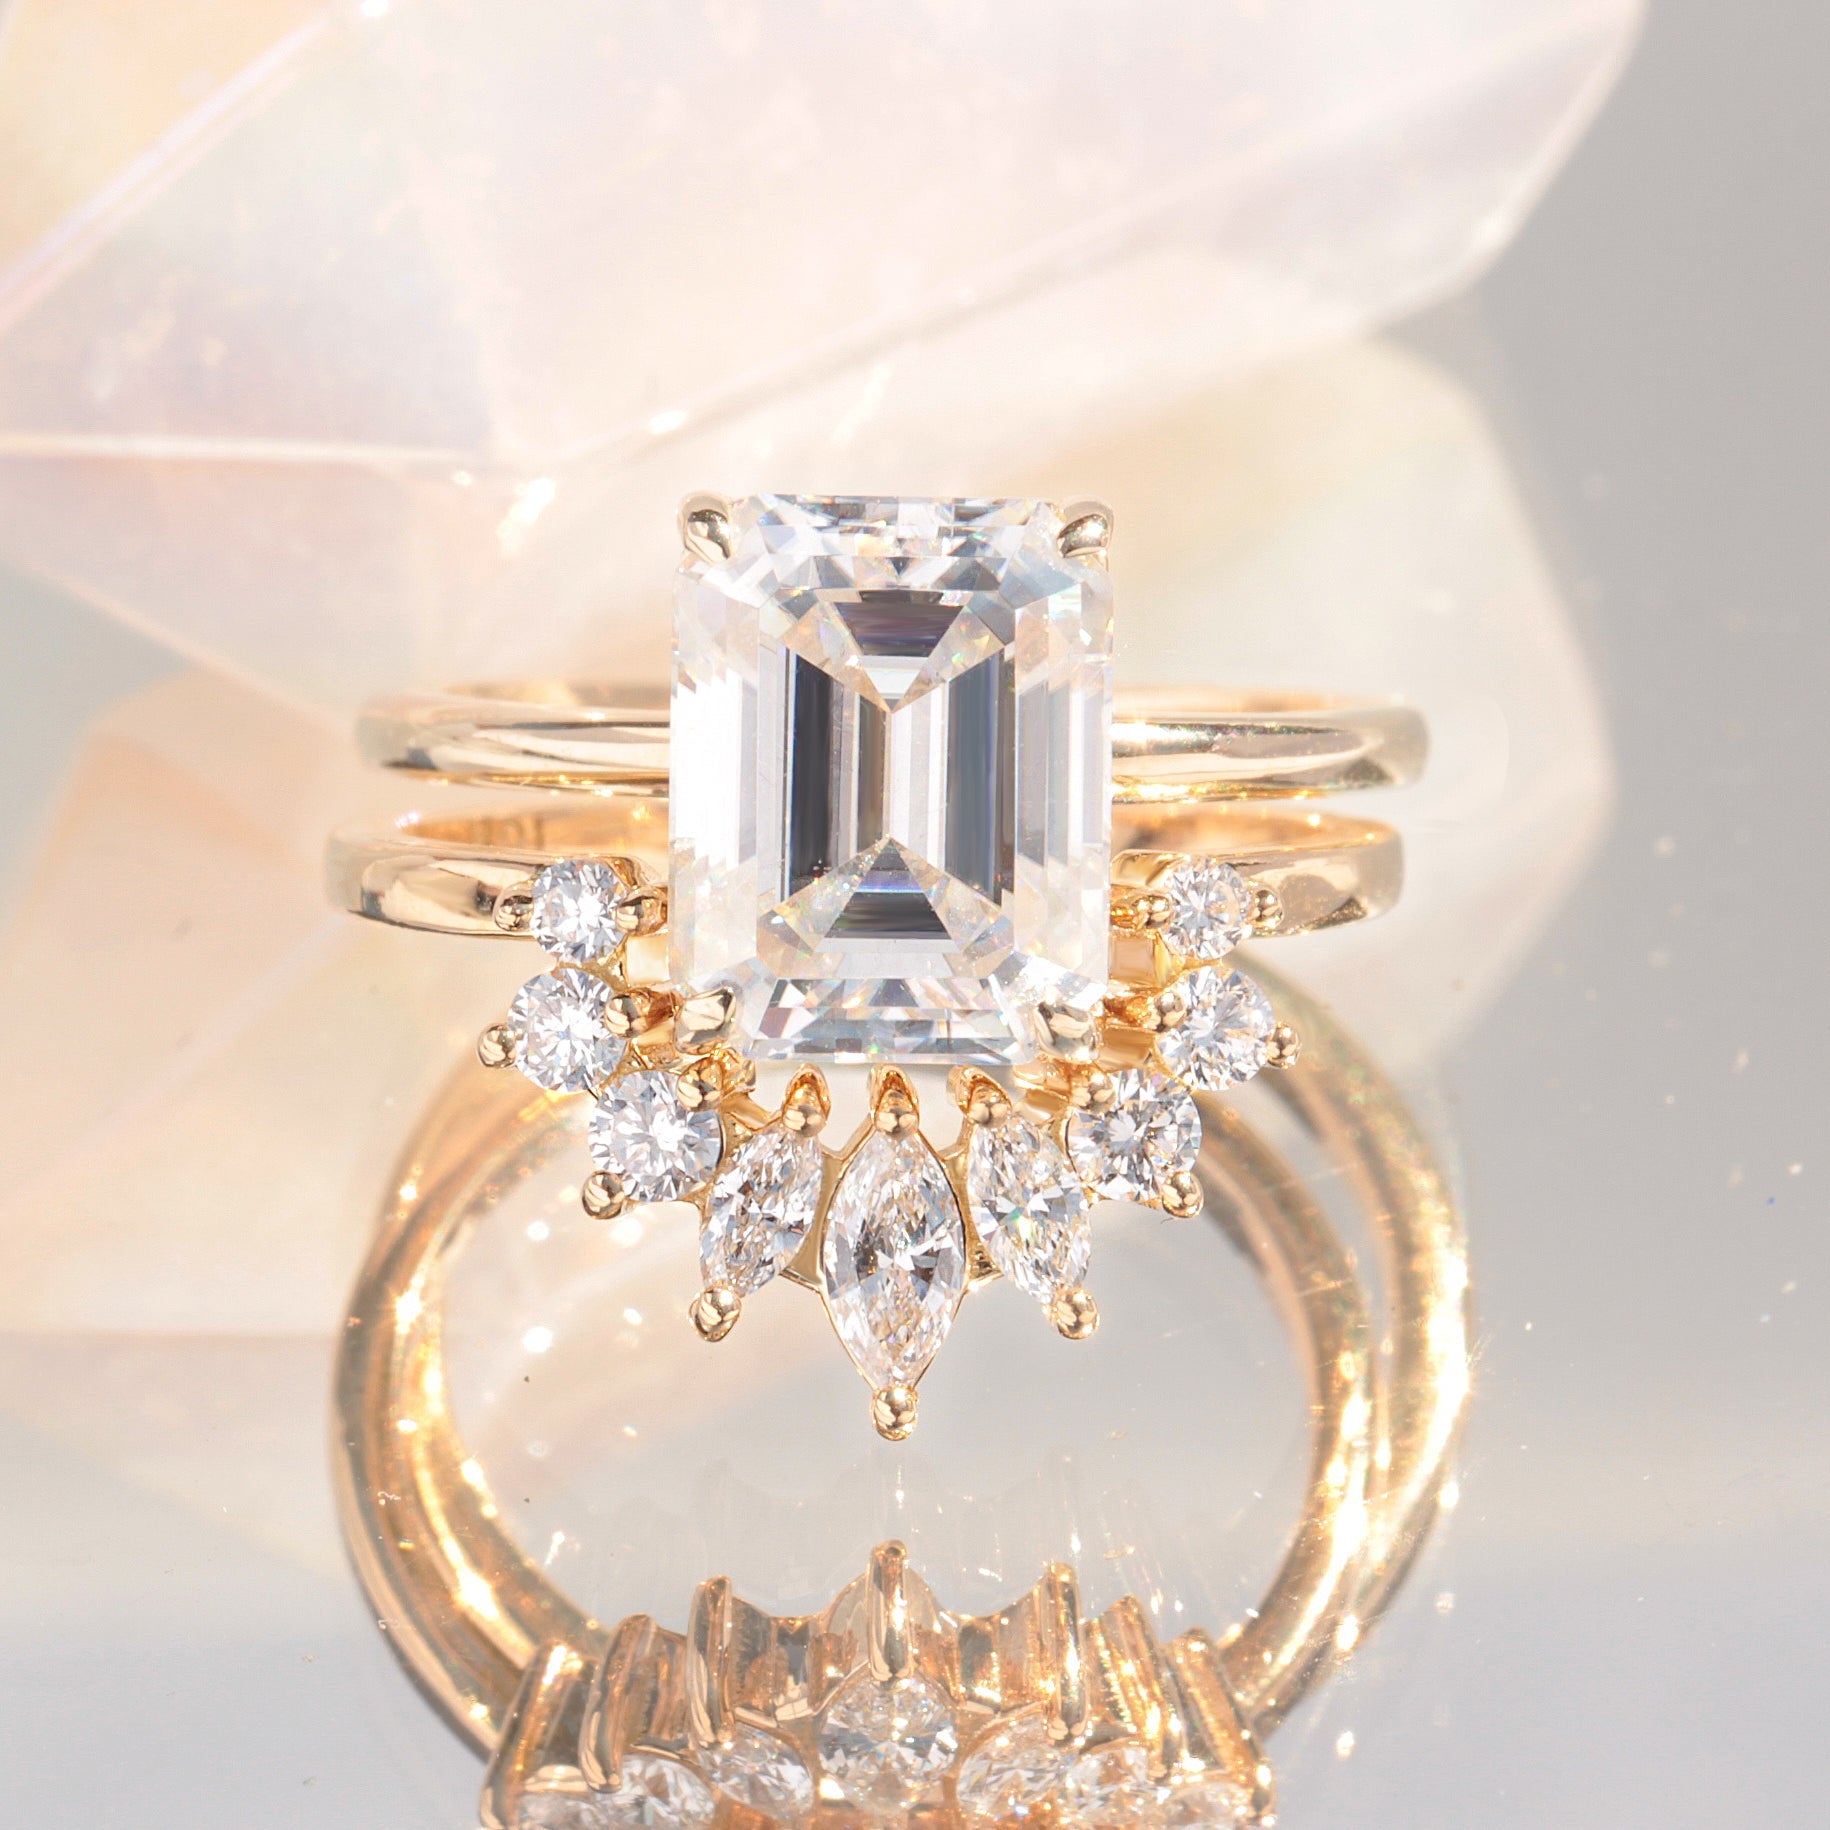 Emerald Cut Solitaire Diamond Engagement Ring "Demi" & "Tessa" Nesting Band, Two Rings Set